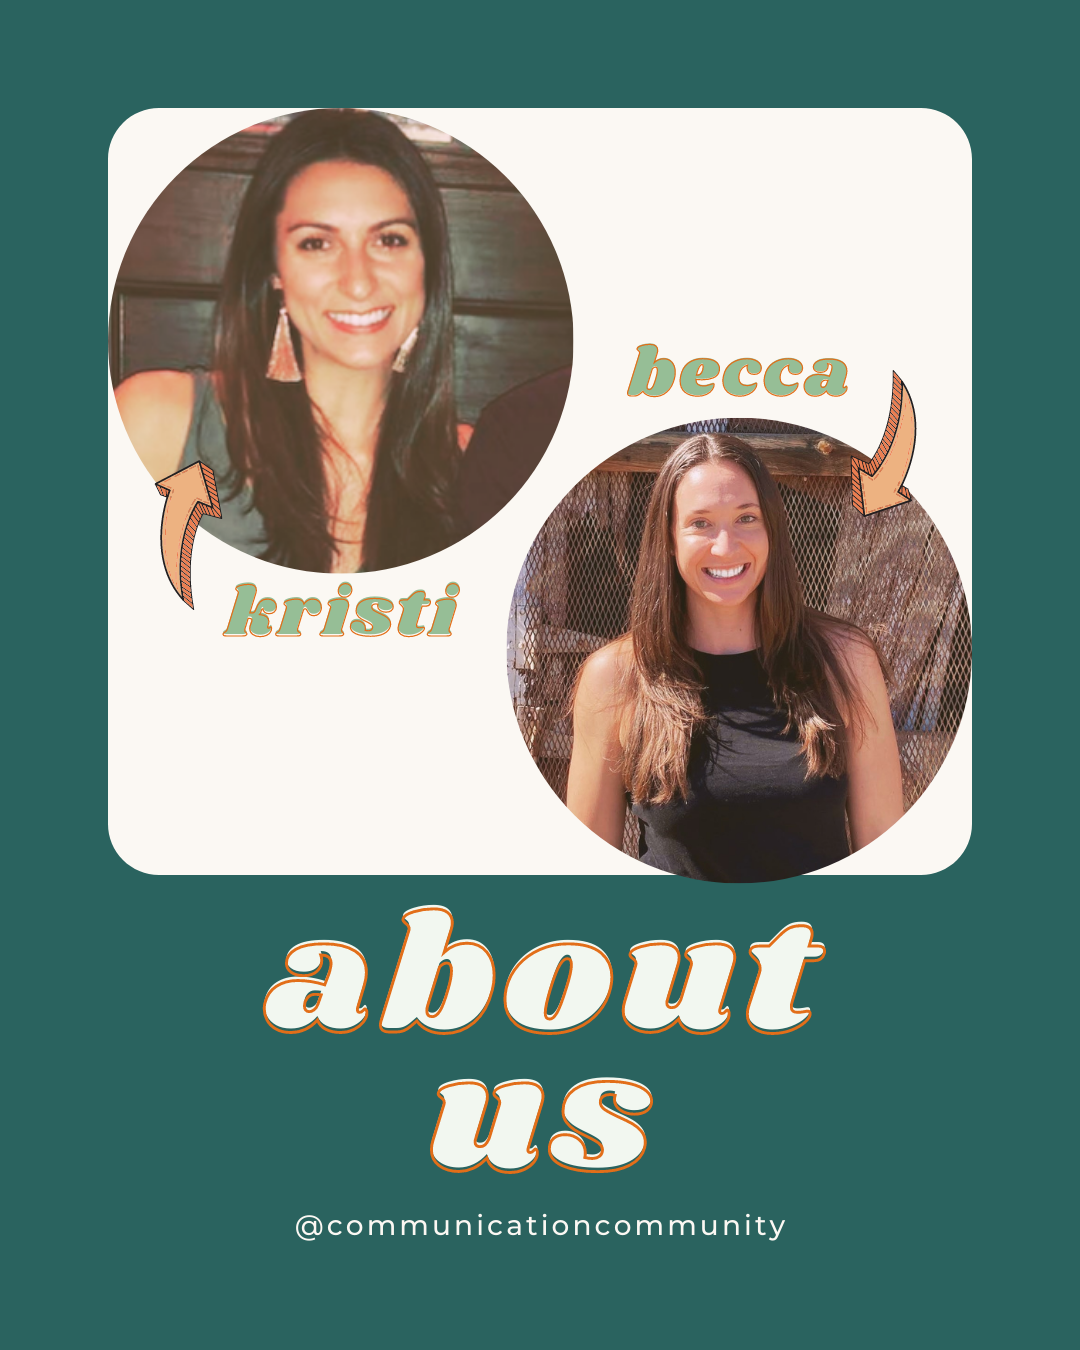 Get to know more about Communication Community co-founders and SLPs, Becca and Kristi!